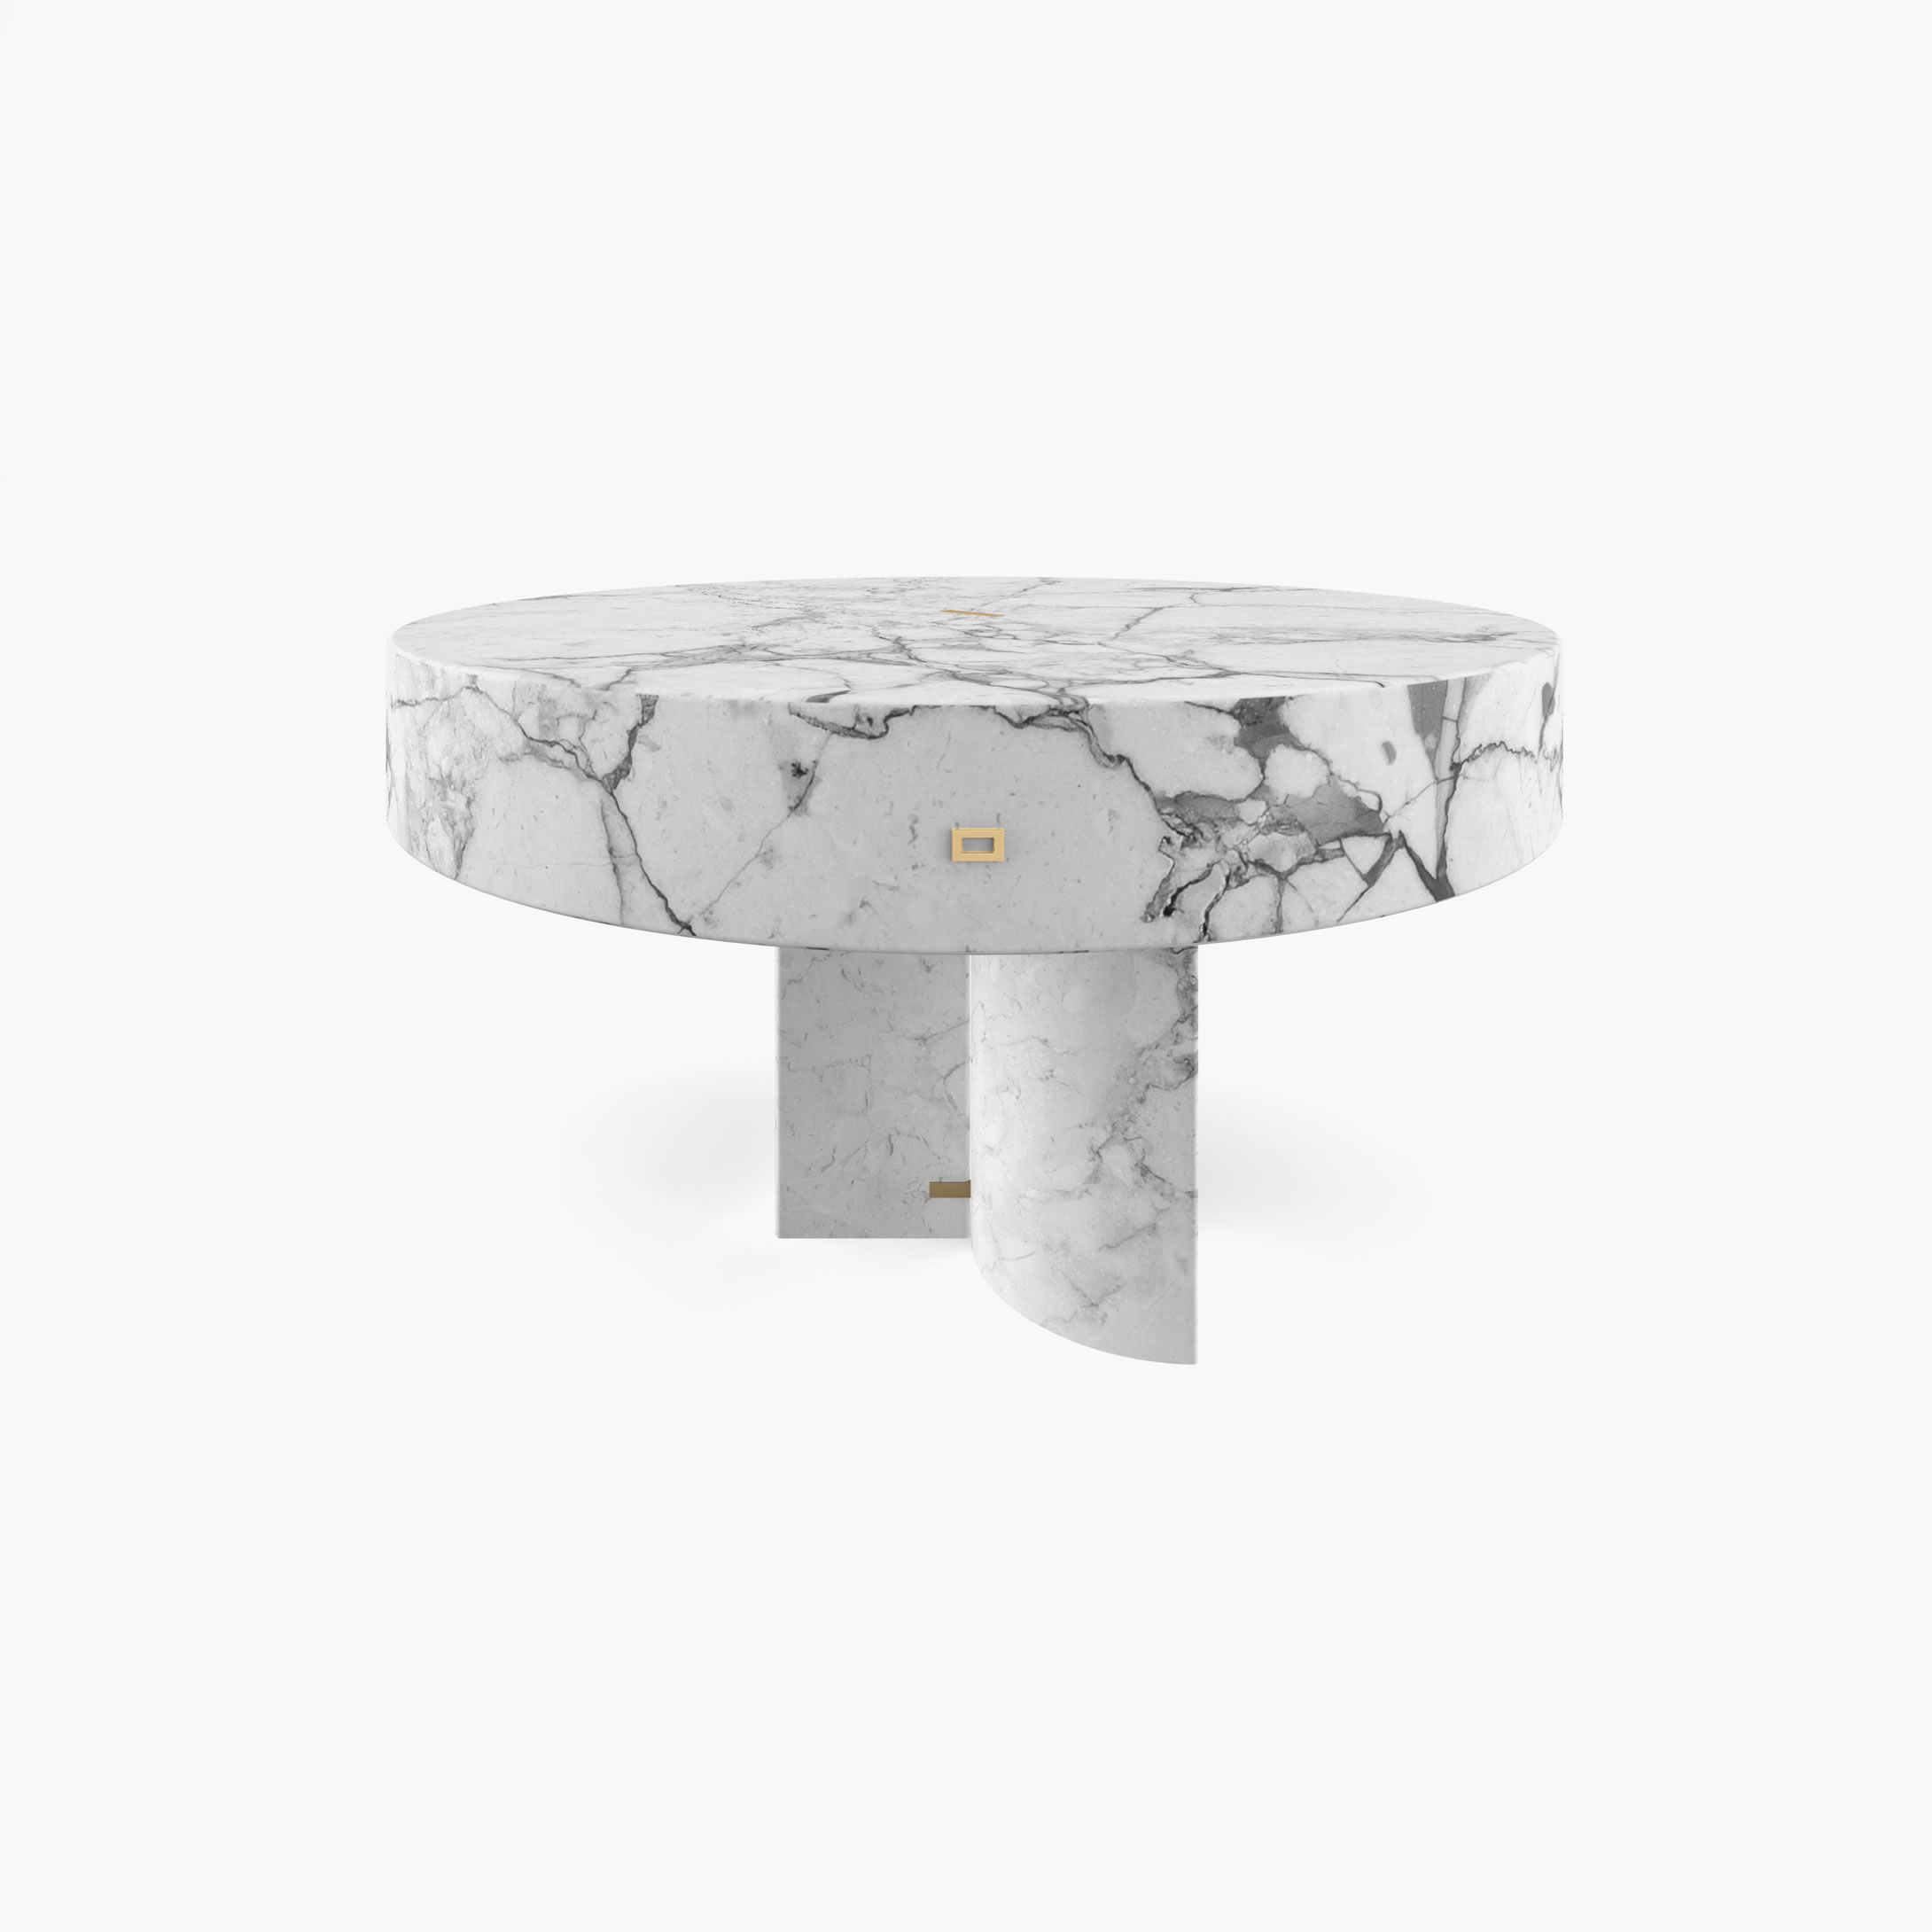 Side Table round Cylinder cuboid prism White Arabescato Marble minimalistic Living Room interior design Side Tables FS 127 FELIX SCHWAKE